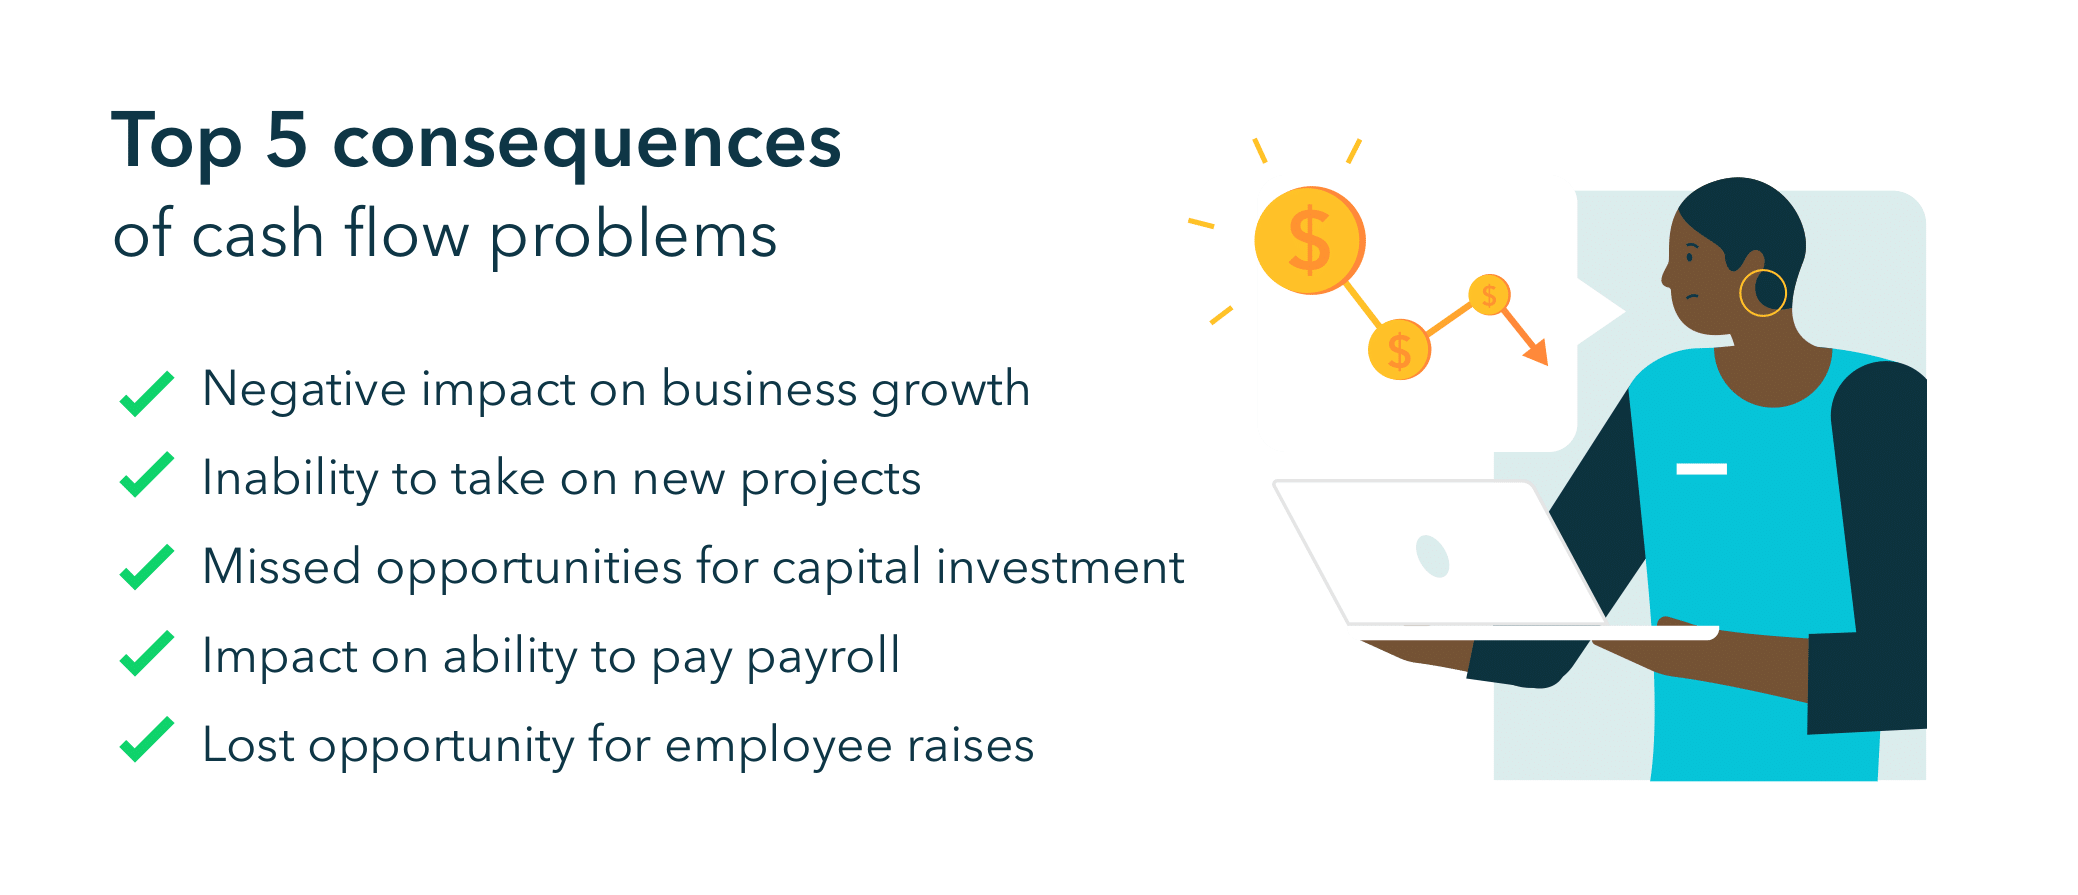 Top 5 consequences of cash flow problems: negative impact on business growth, inability to take on new projects, missed opportunities for capital investment, impact on ability to pay payroll, lost opportunity for employee raises.